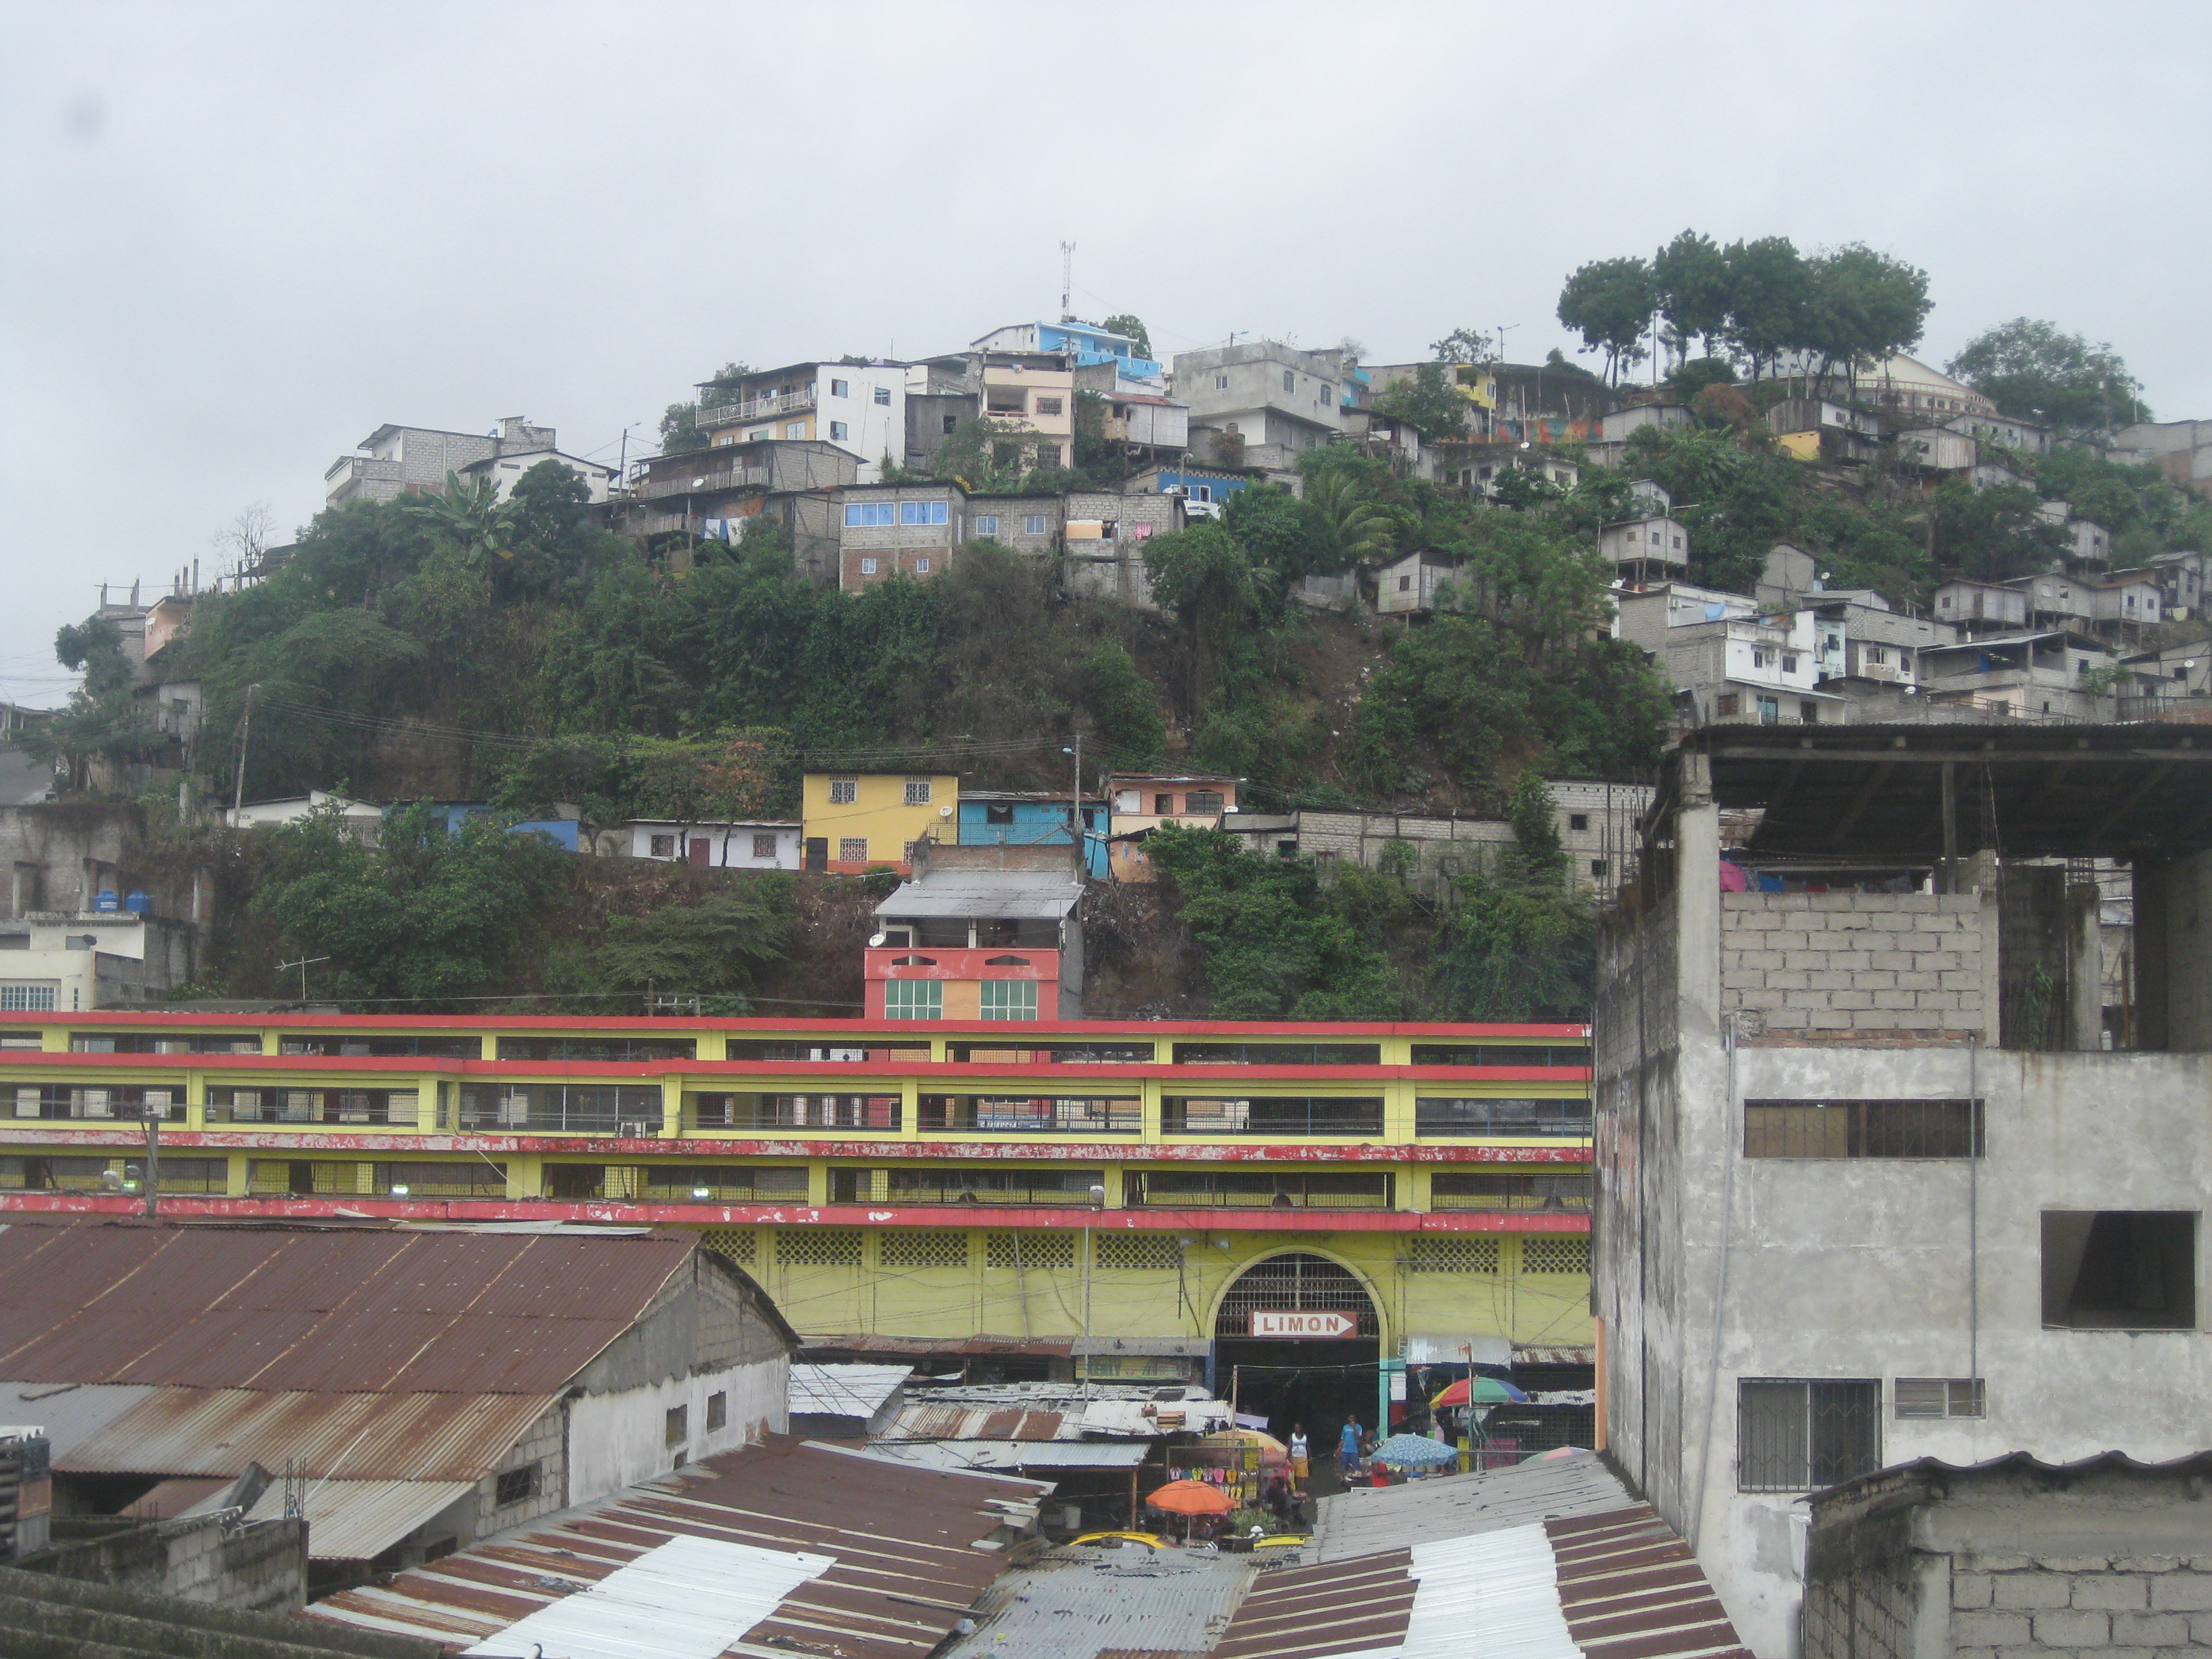 Located in the Center Zone of Esmeraldas, this photo shows some of the inadequacies of the built environment, such as the fragile roofs, vulnerability of houses on a slope, and signs of poor sanitation (visible discards on the slope).